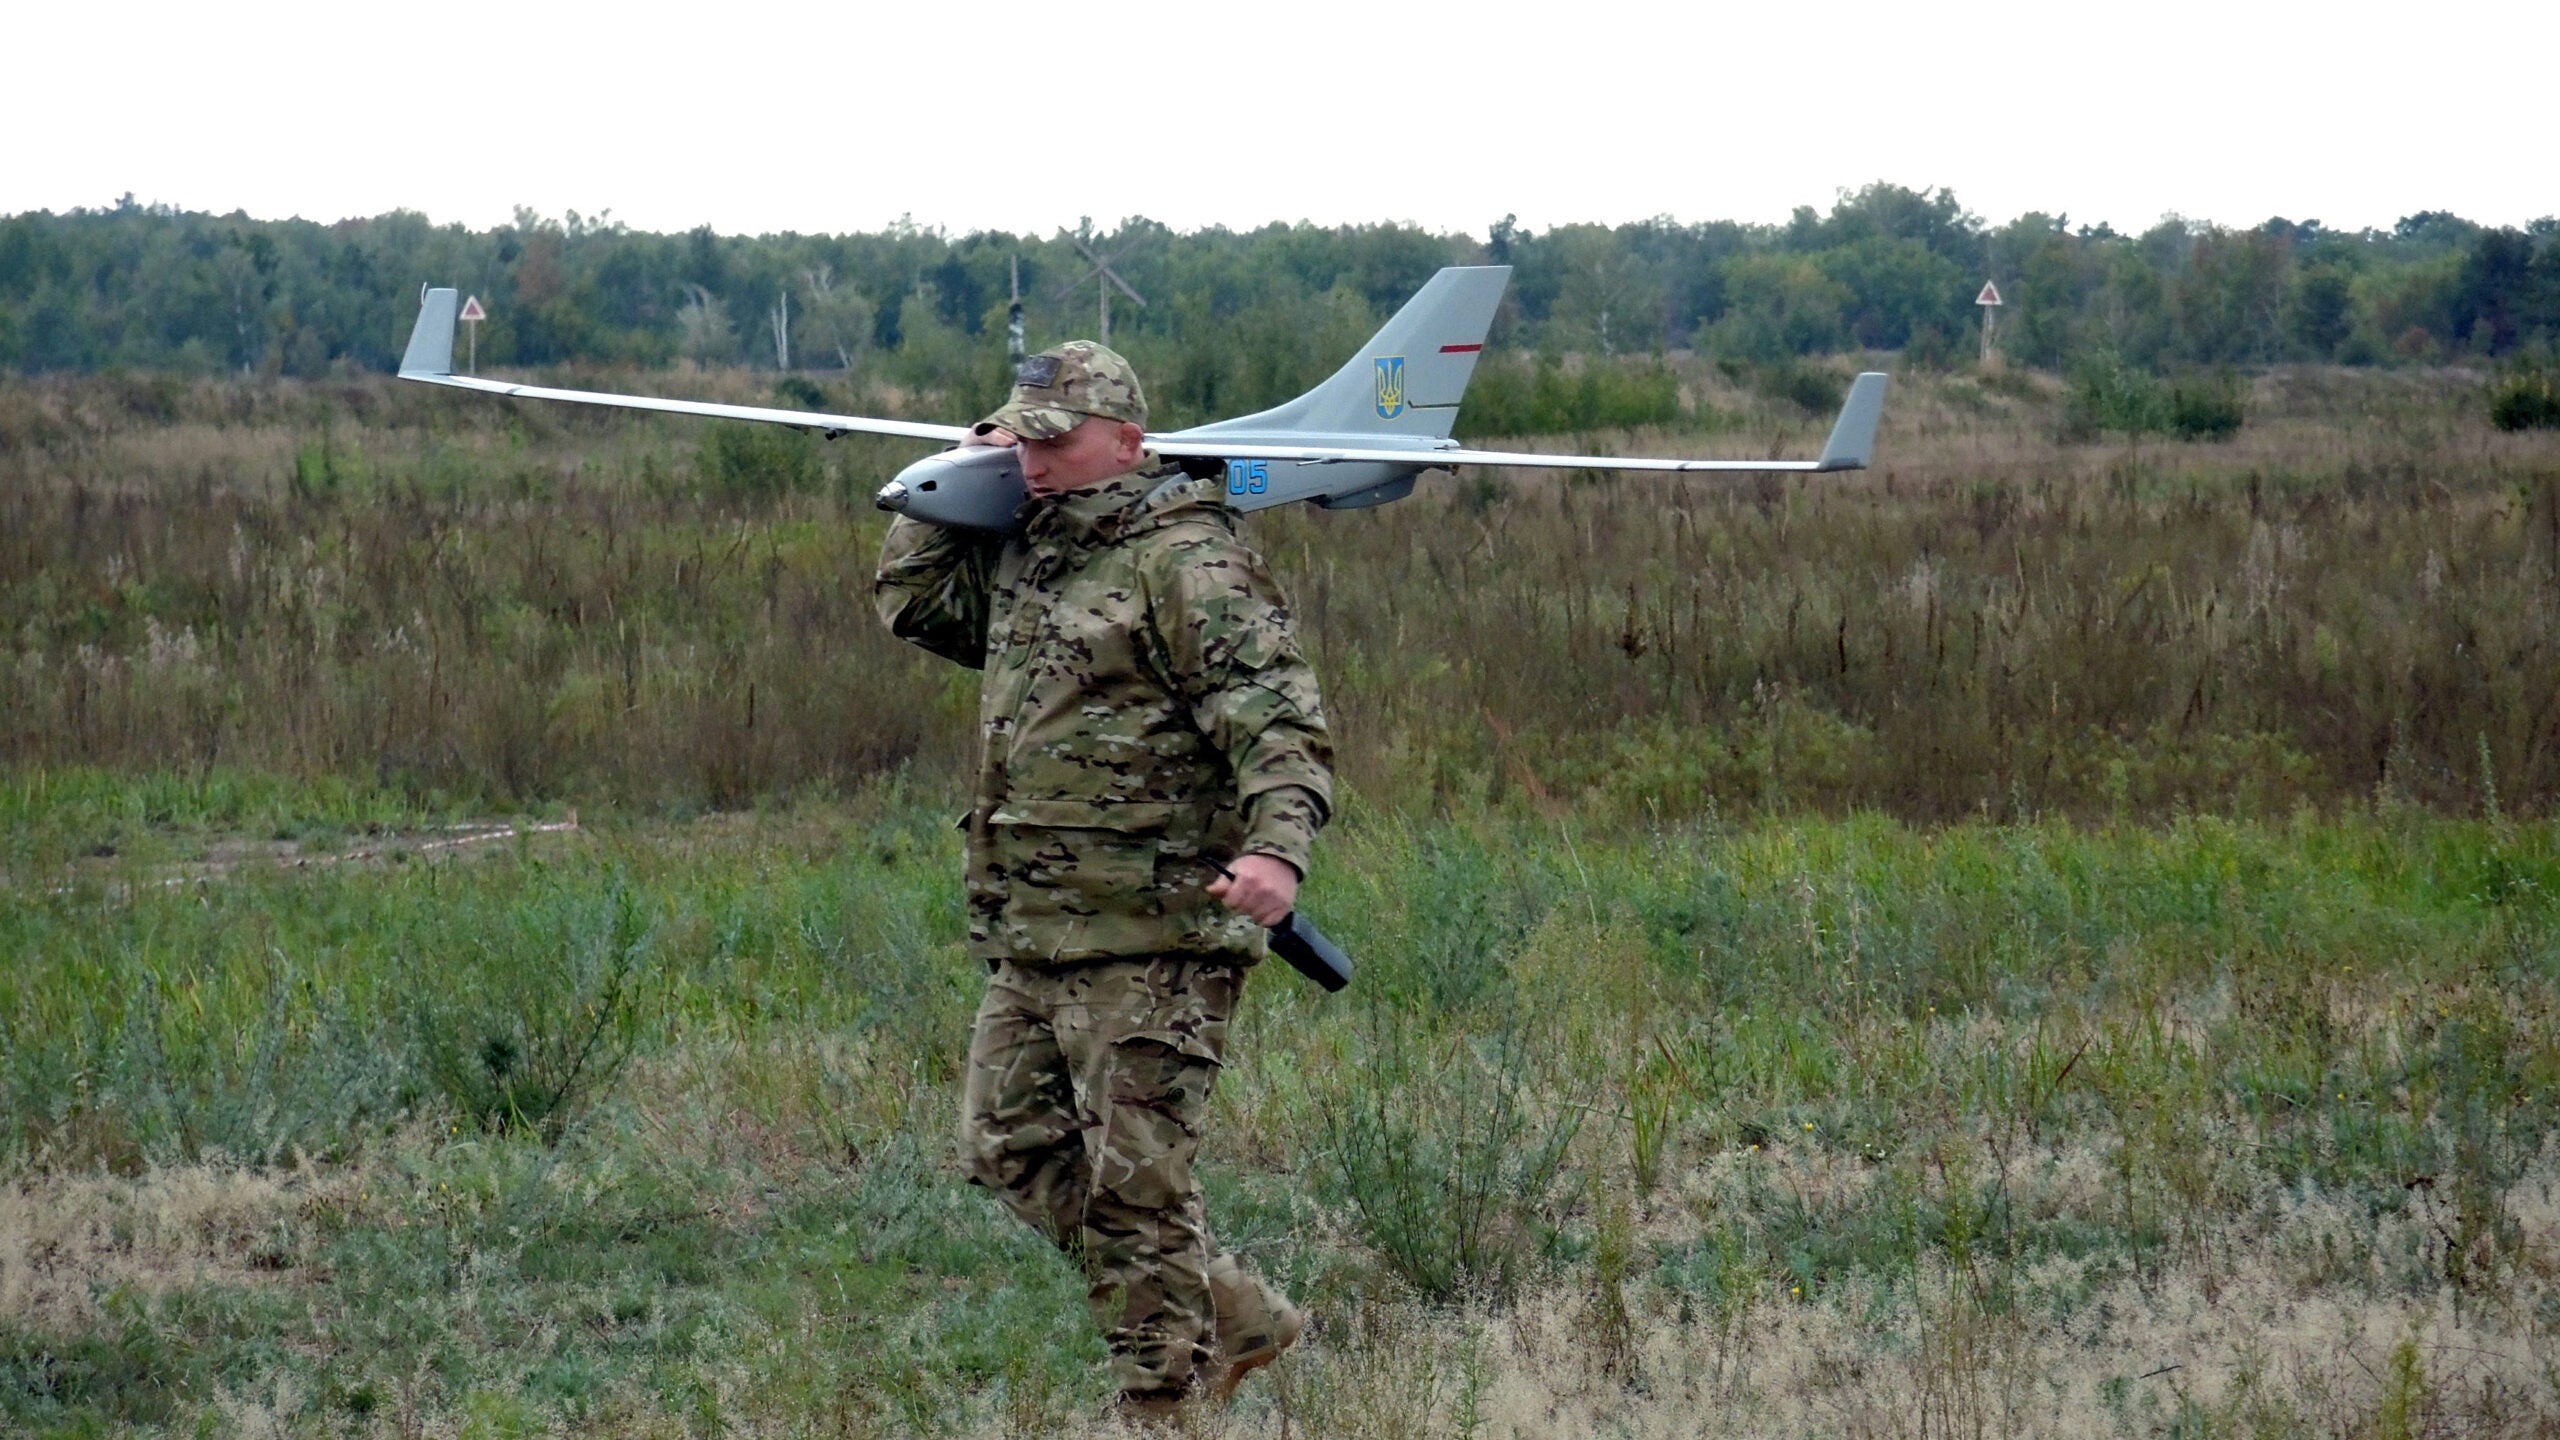 A contestant carries an unmanned aerial vehicle (UAV) during a competition for the best drone crew title for security forces, Cherkasy, central Ukraine, September 25, 2018. Ukrinform. (Photo credit should read Yulii Zozulia/Future Publishing via Getty Images)